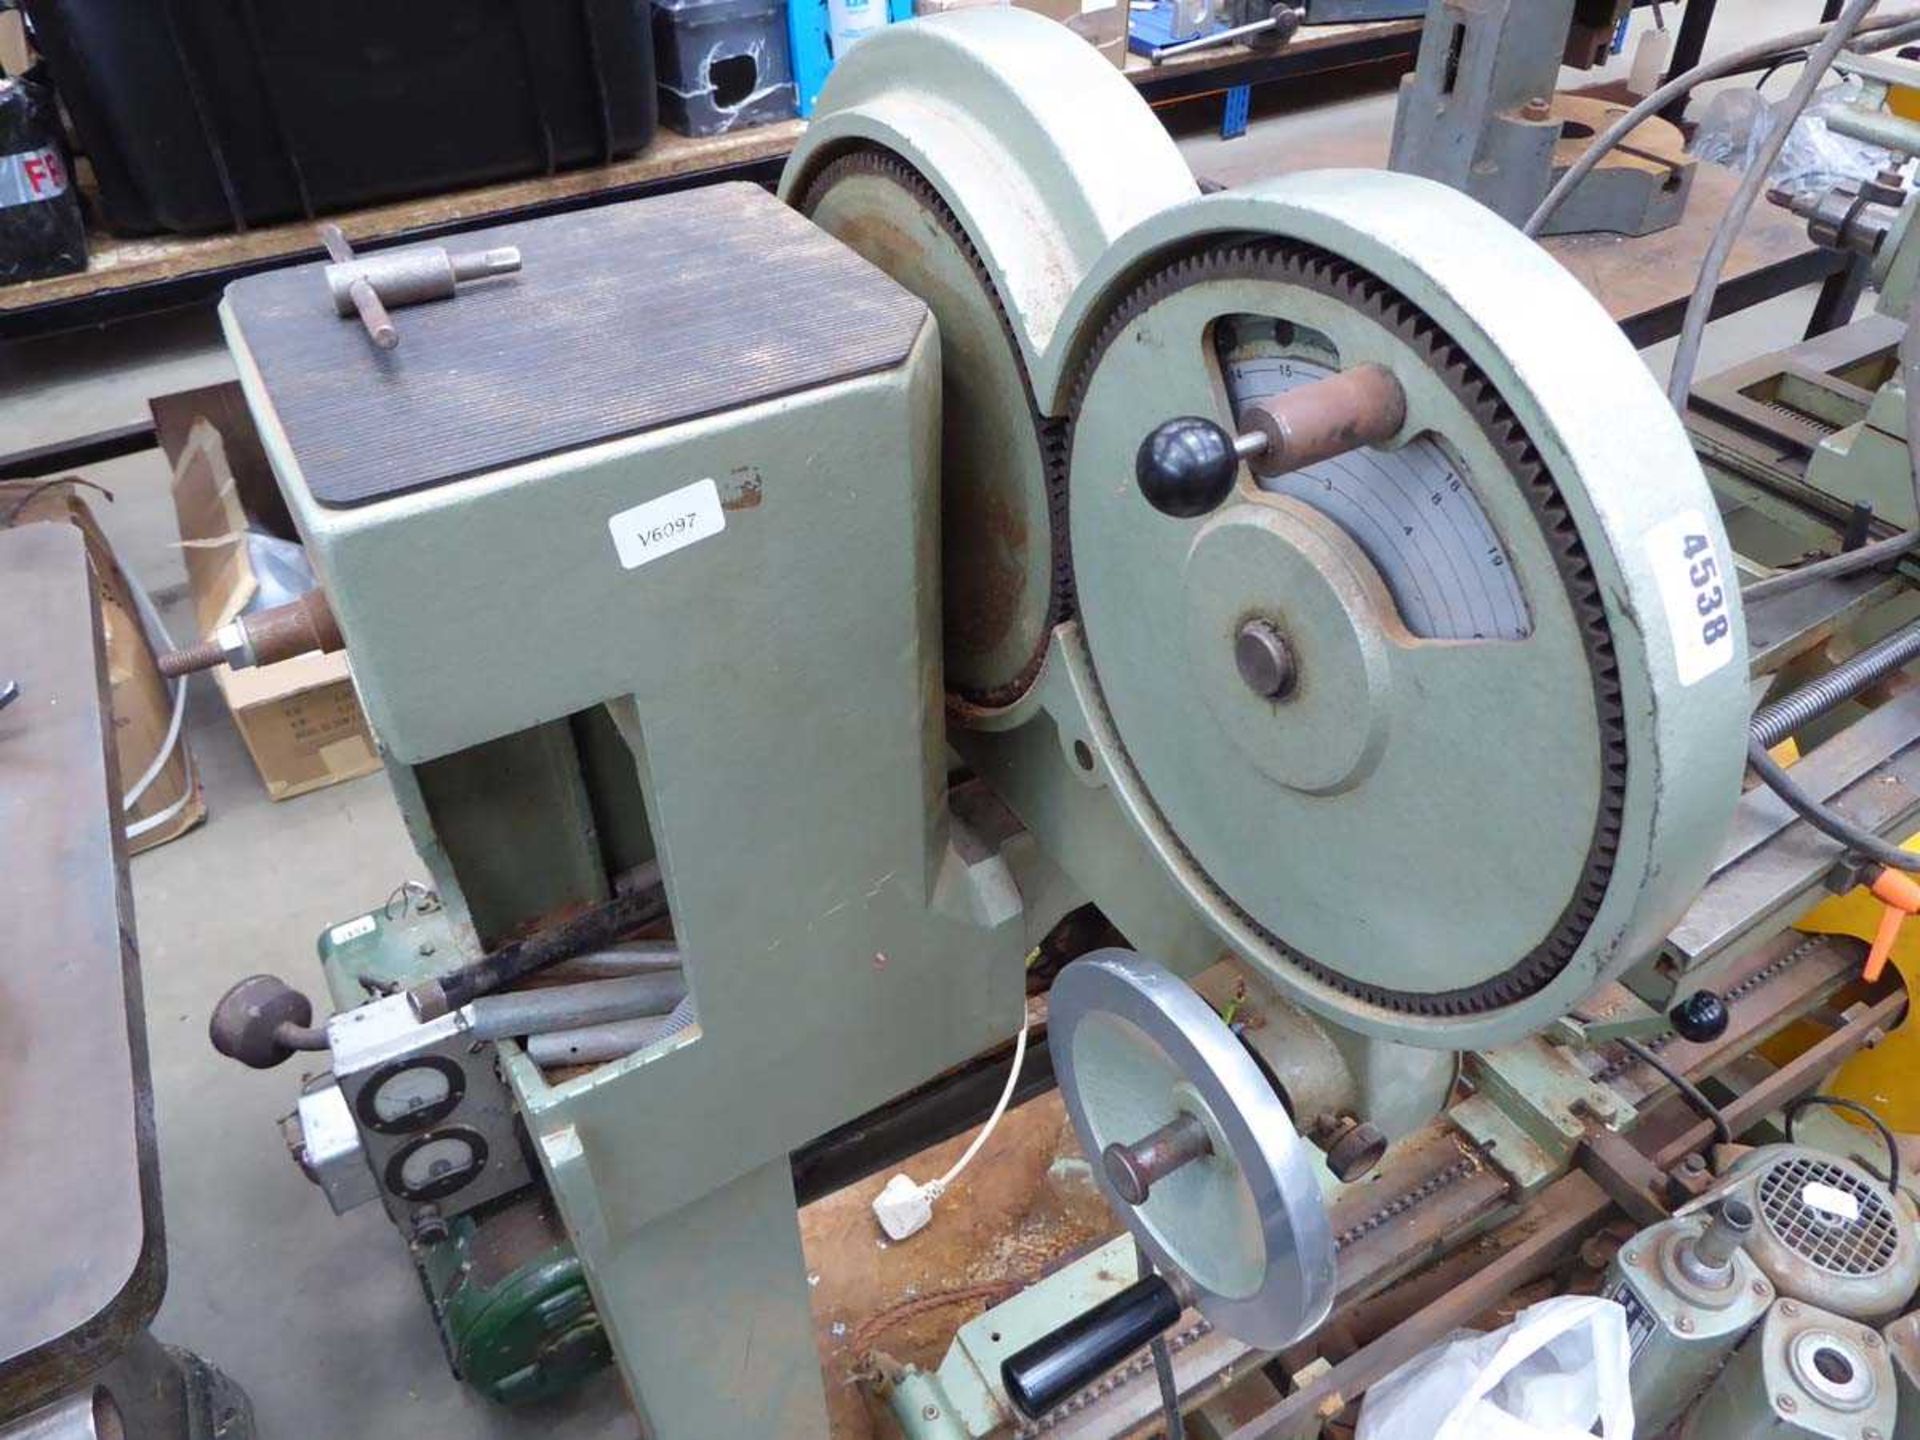 Hapco Albus woodturning copy lathe with 4ft bed and barley twist tooling, 3 phase electric - Image 3 of 5